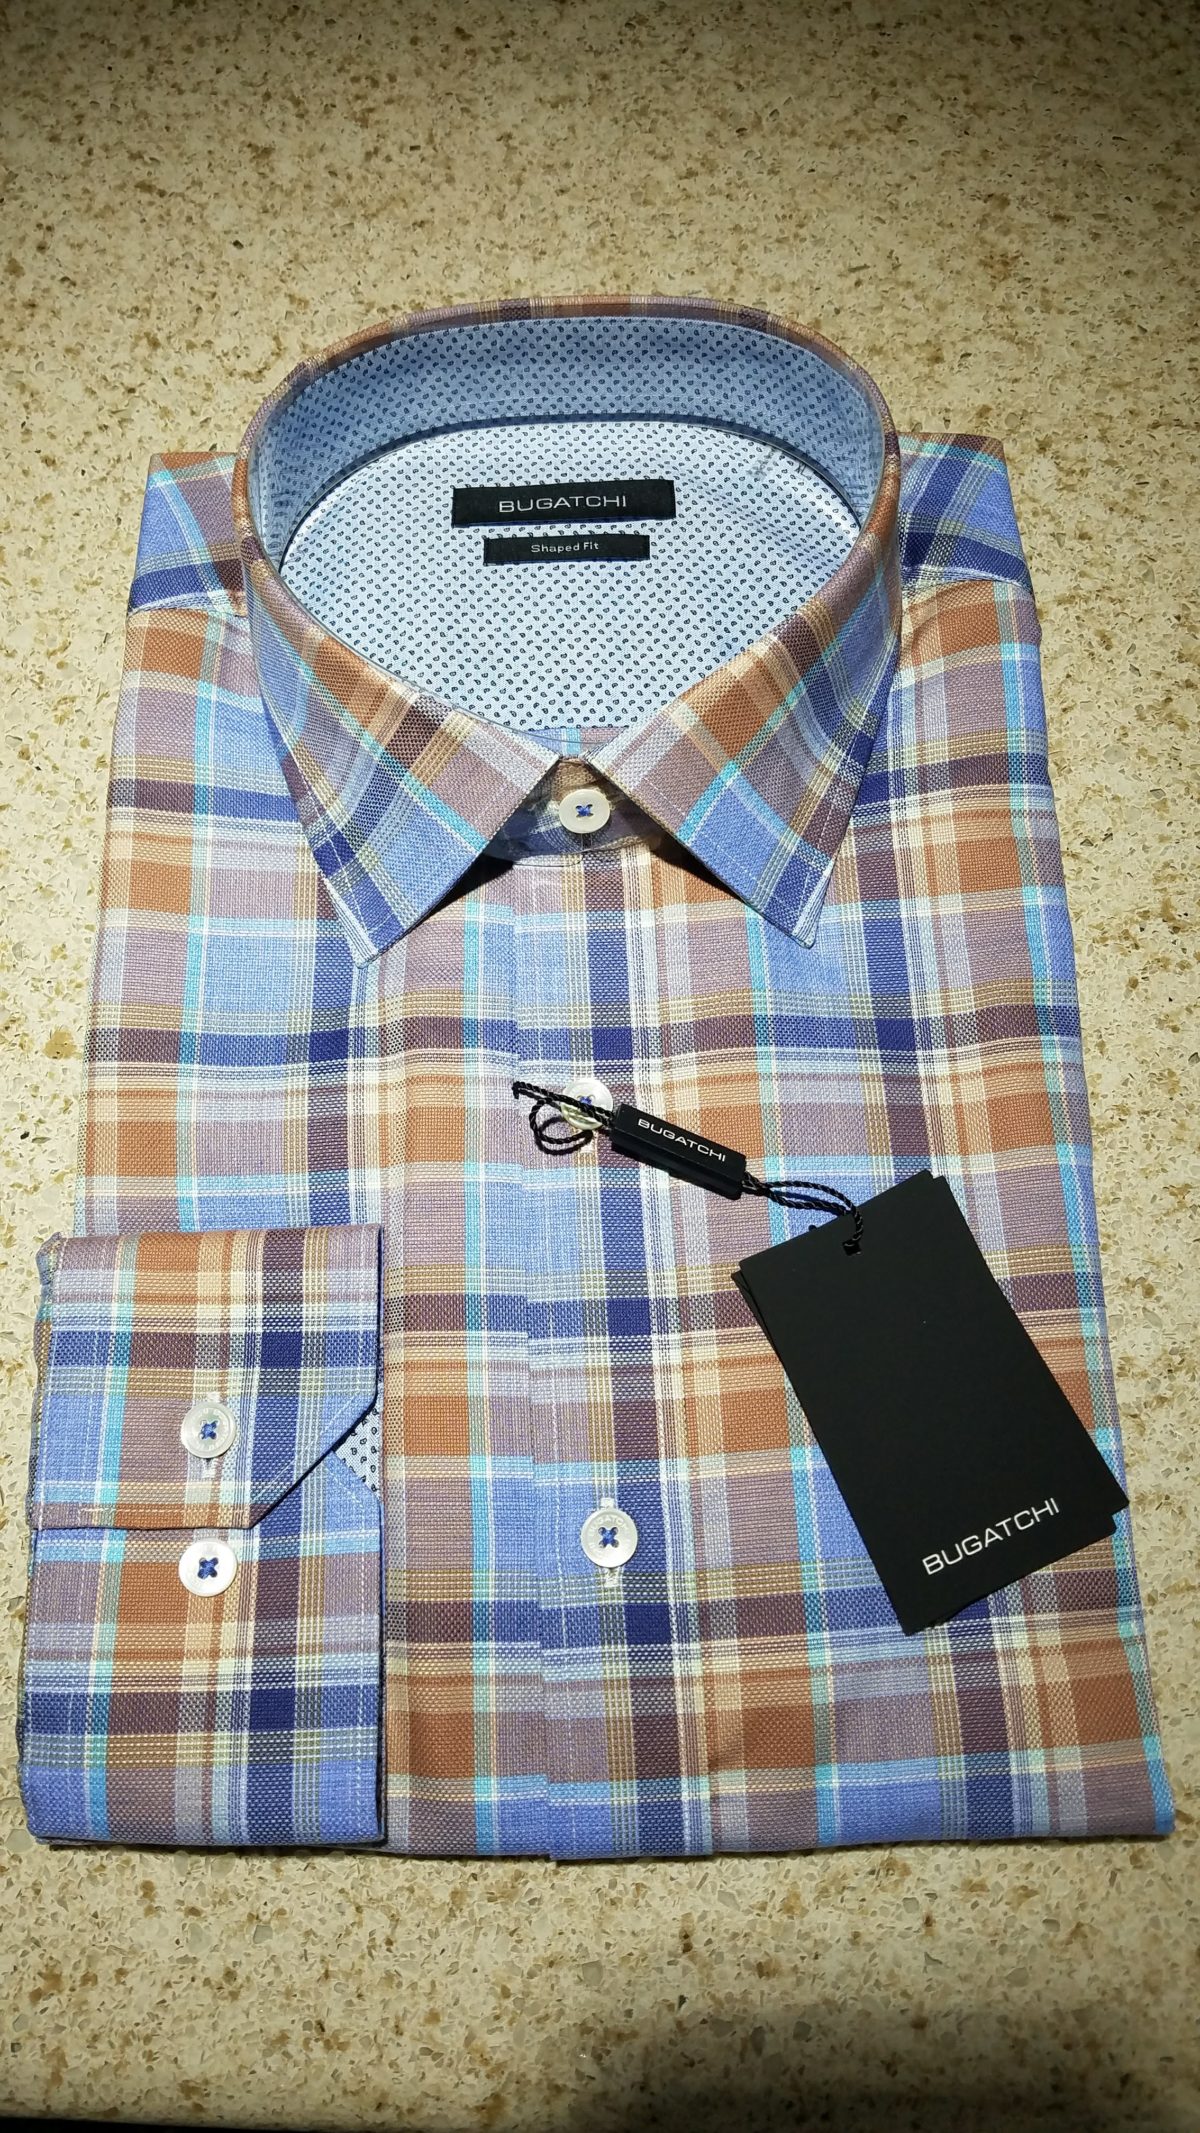 bucco-couture-the-man-of-style-custom-suits-bugatchi-shirt-2